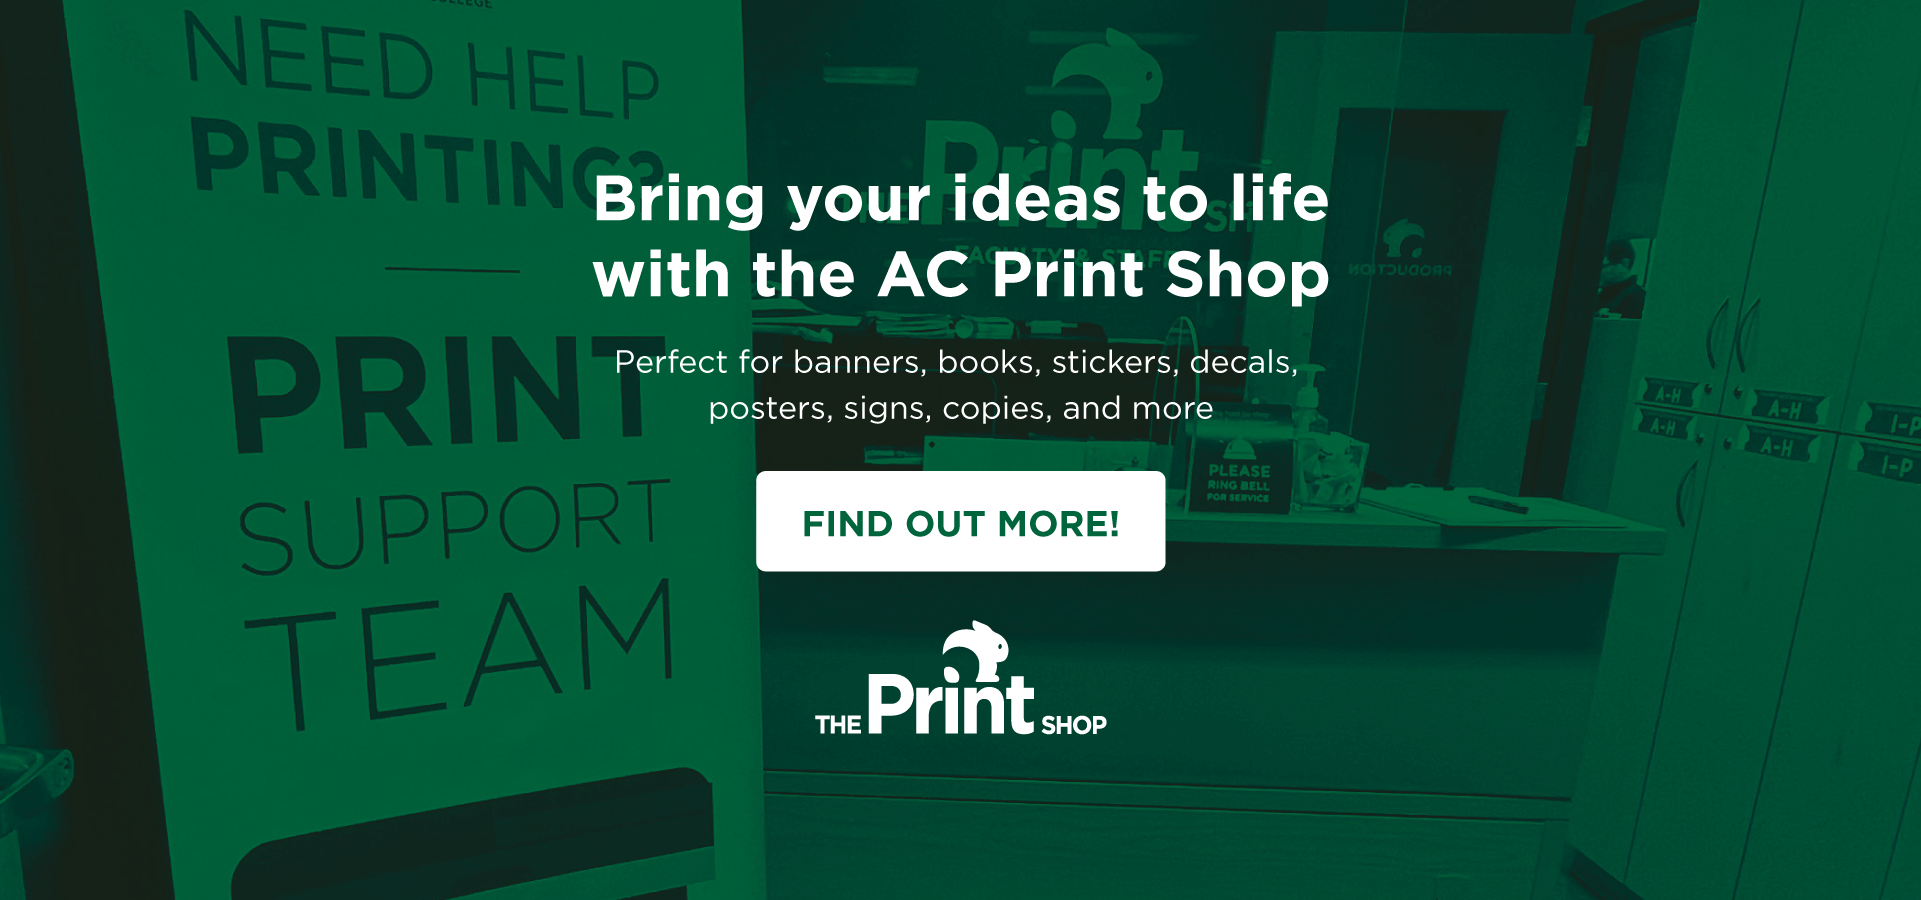 Bring your ideas to life with the AC Print Shop. Perfect for banners, books, stickers, decals, posters, signs, copies, and more. Link:Find out More!